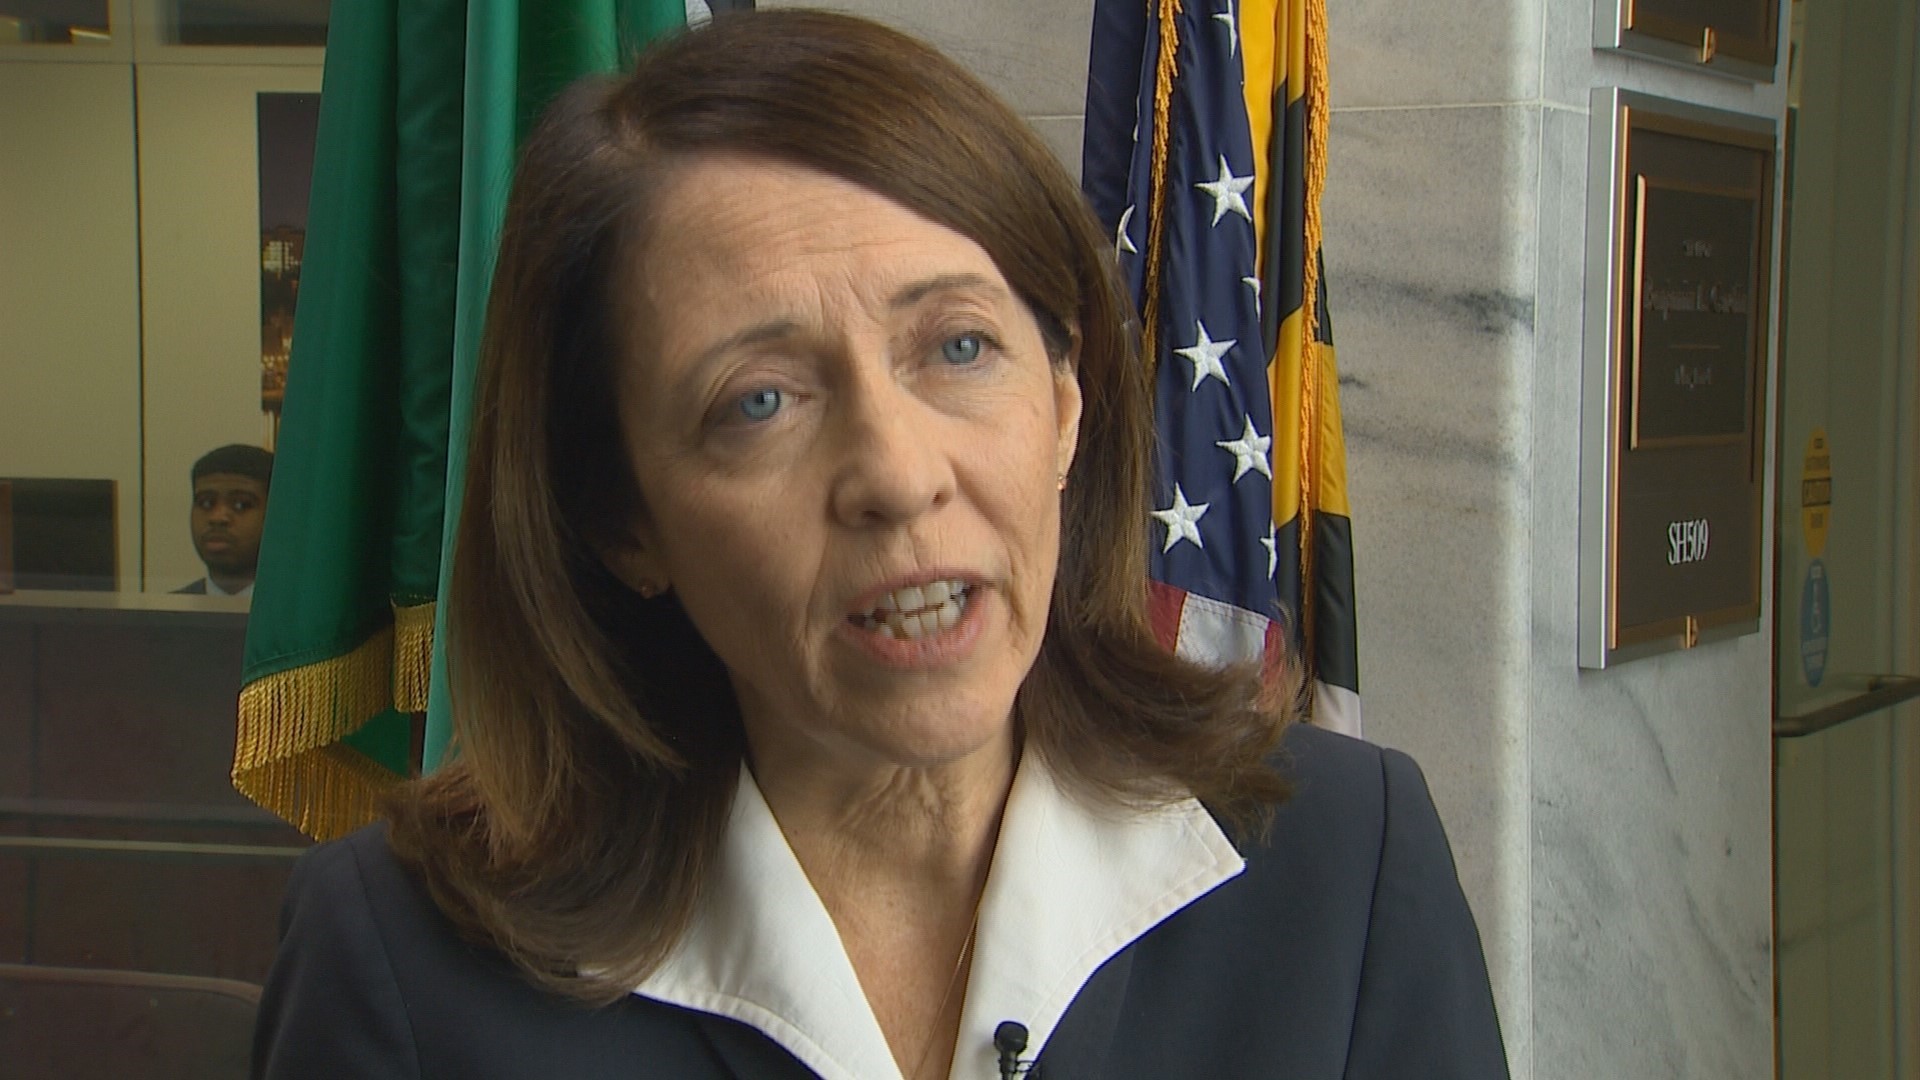 U.S. Senator Maria Cantwell of Washington spoke with KING 5's Glenn Farley about the Boeing 737 MAX crisis and the ongoing Senate hearings in Washington D.C.